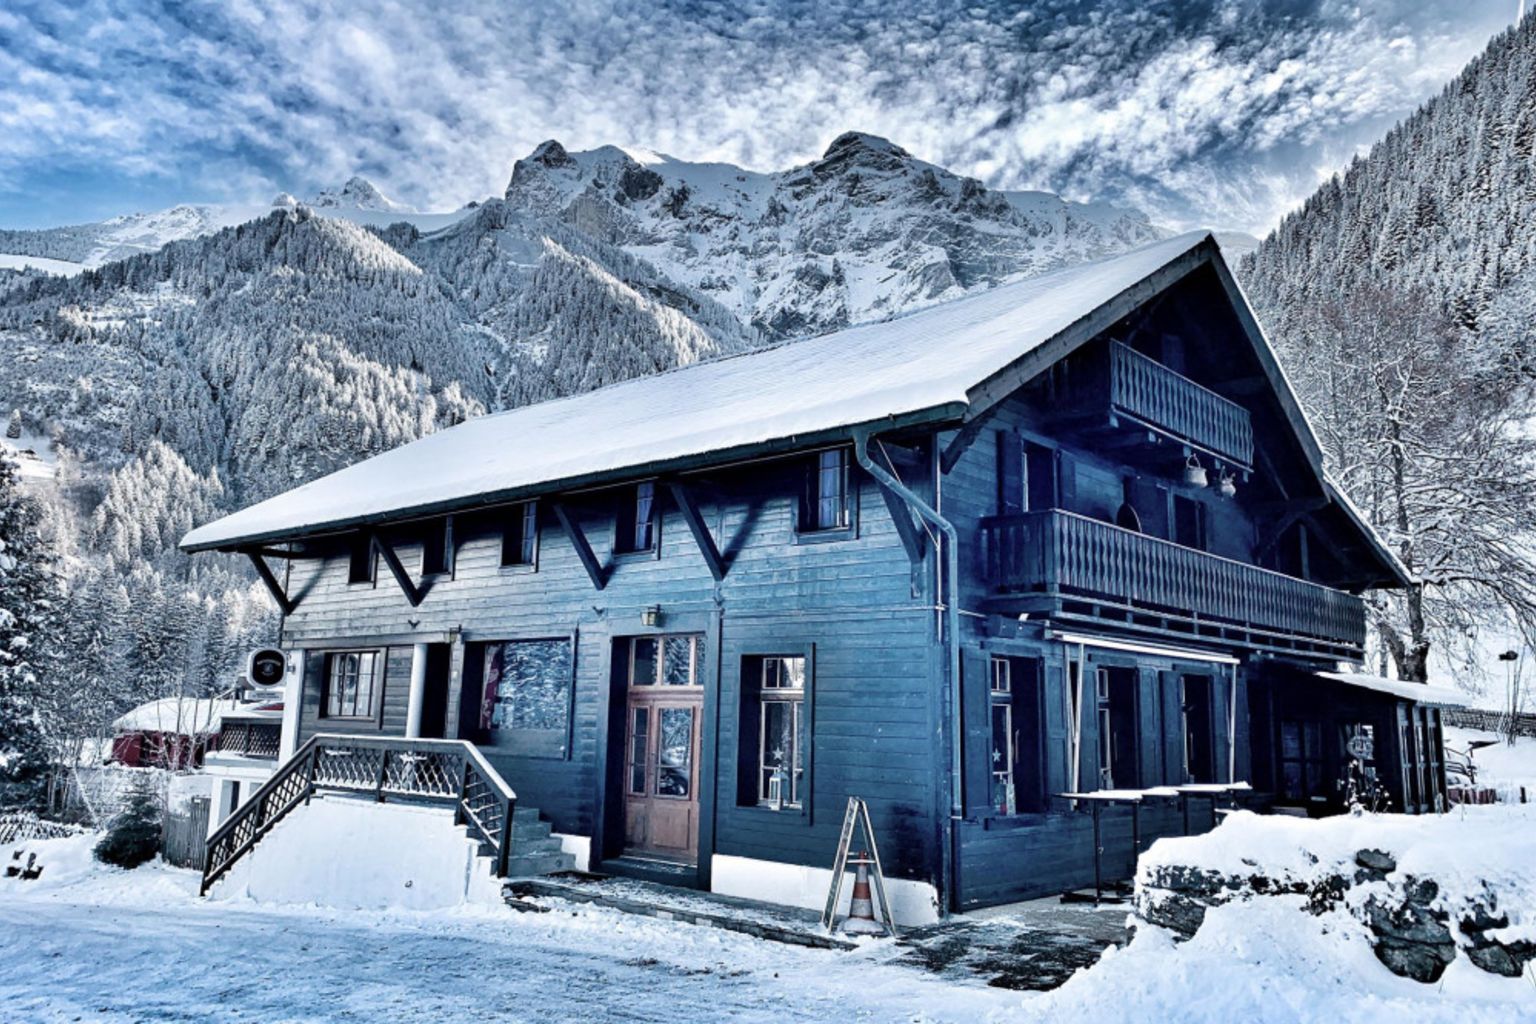 The Grand Paradis guest house in Champéry, Valais